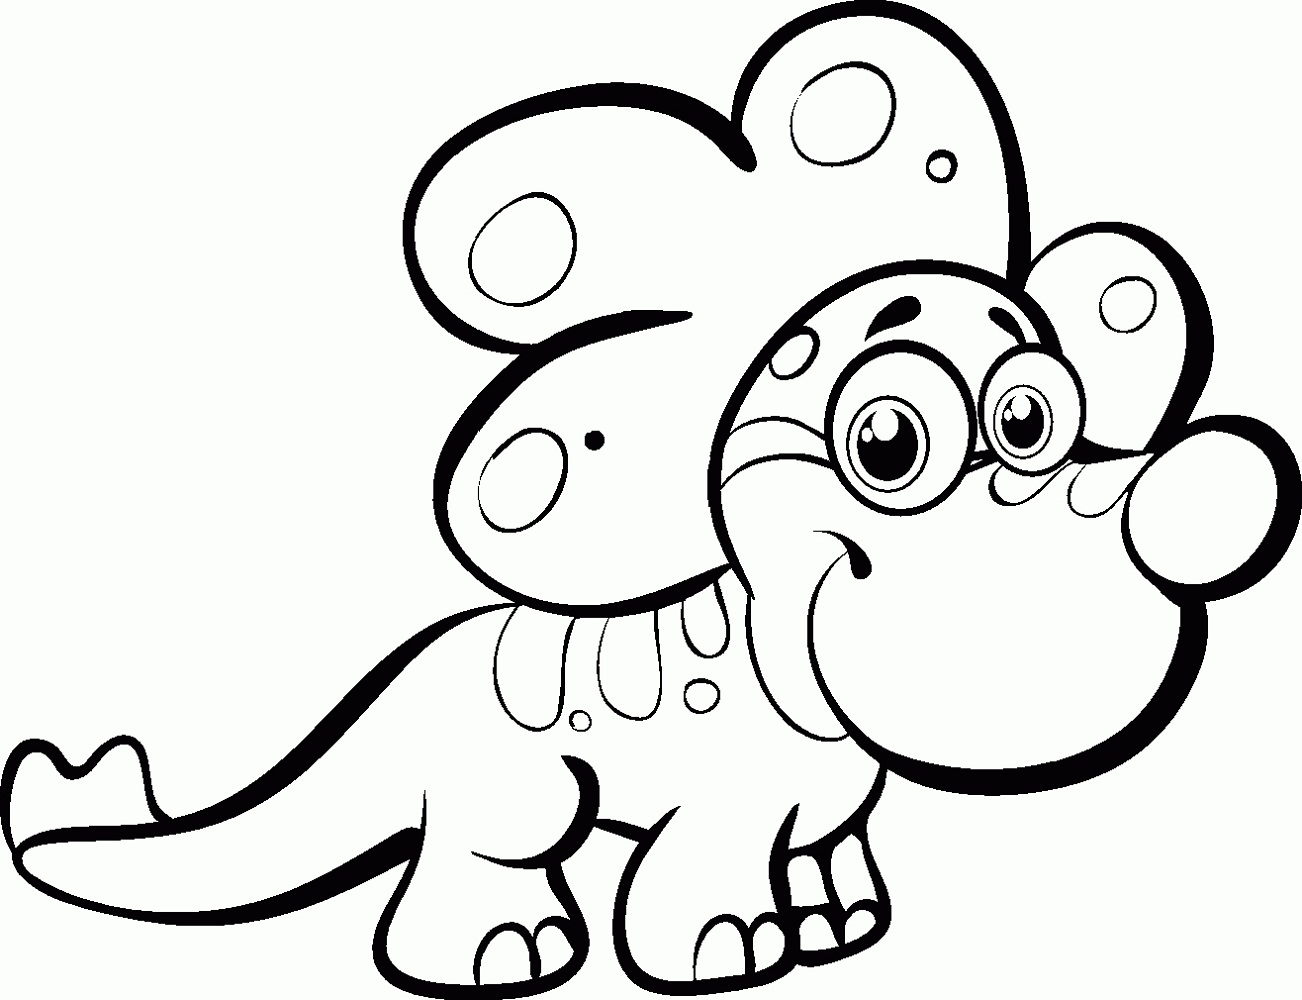 Baby Dinosaur Coloring Pages for Preschoolers   Activity Shelter